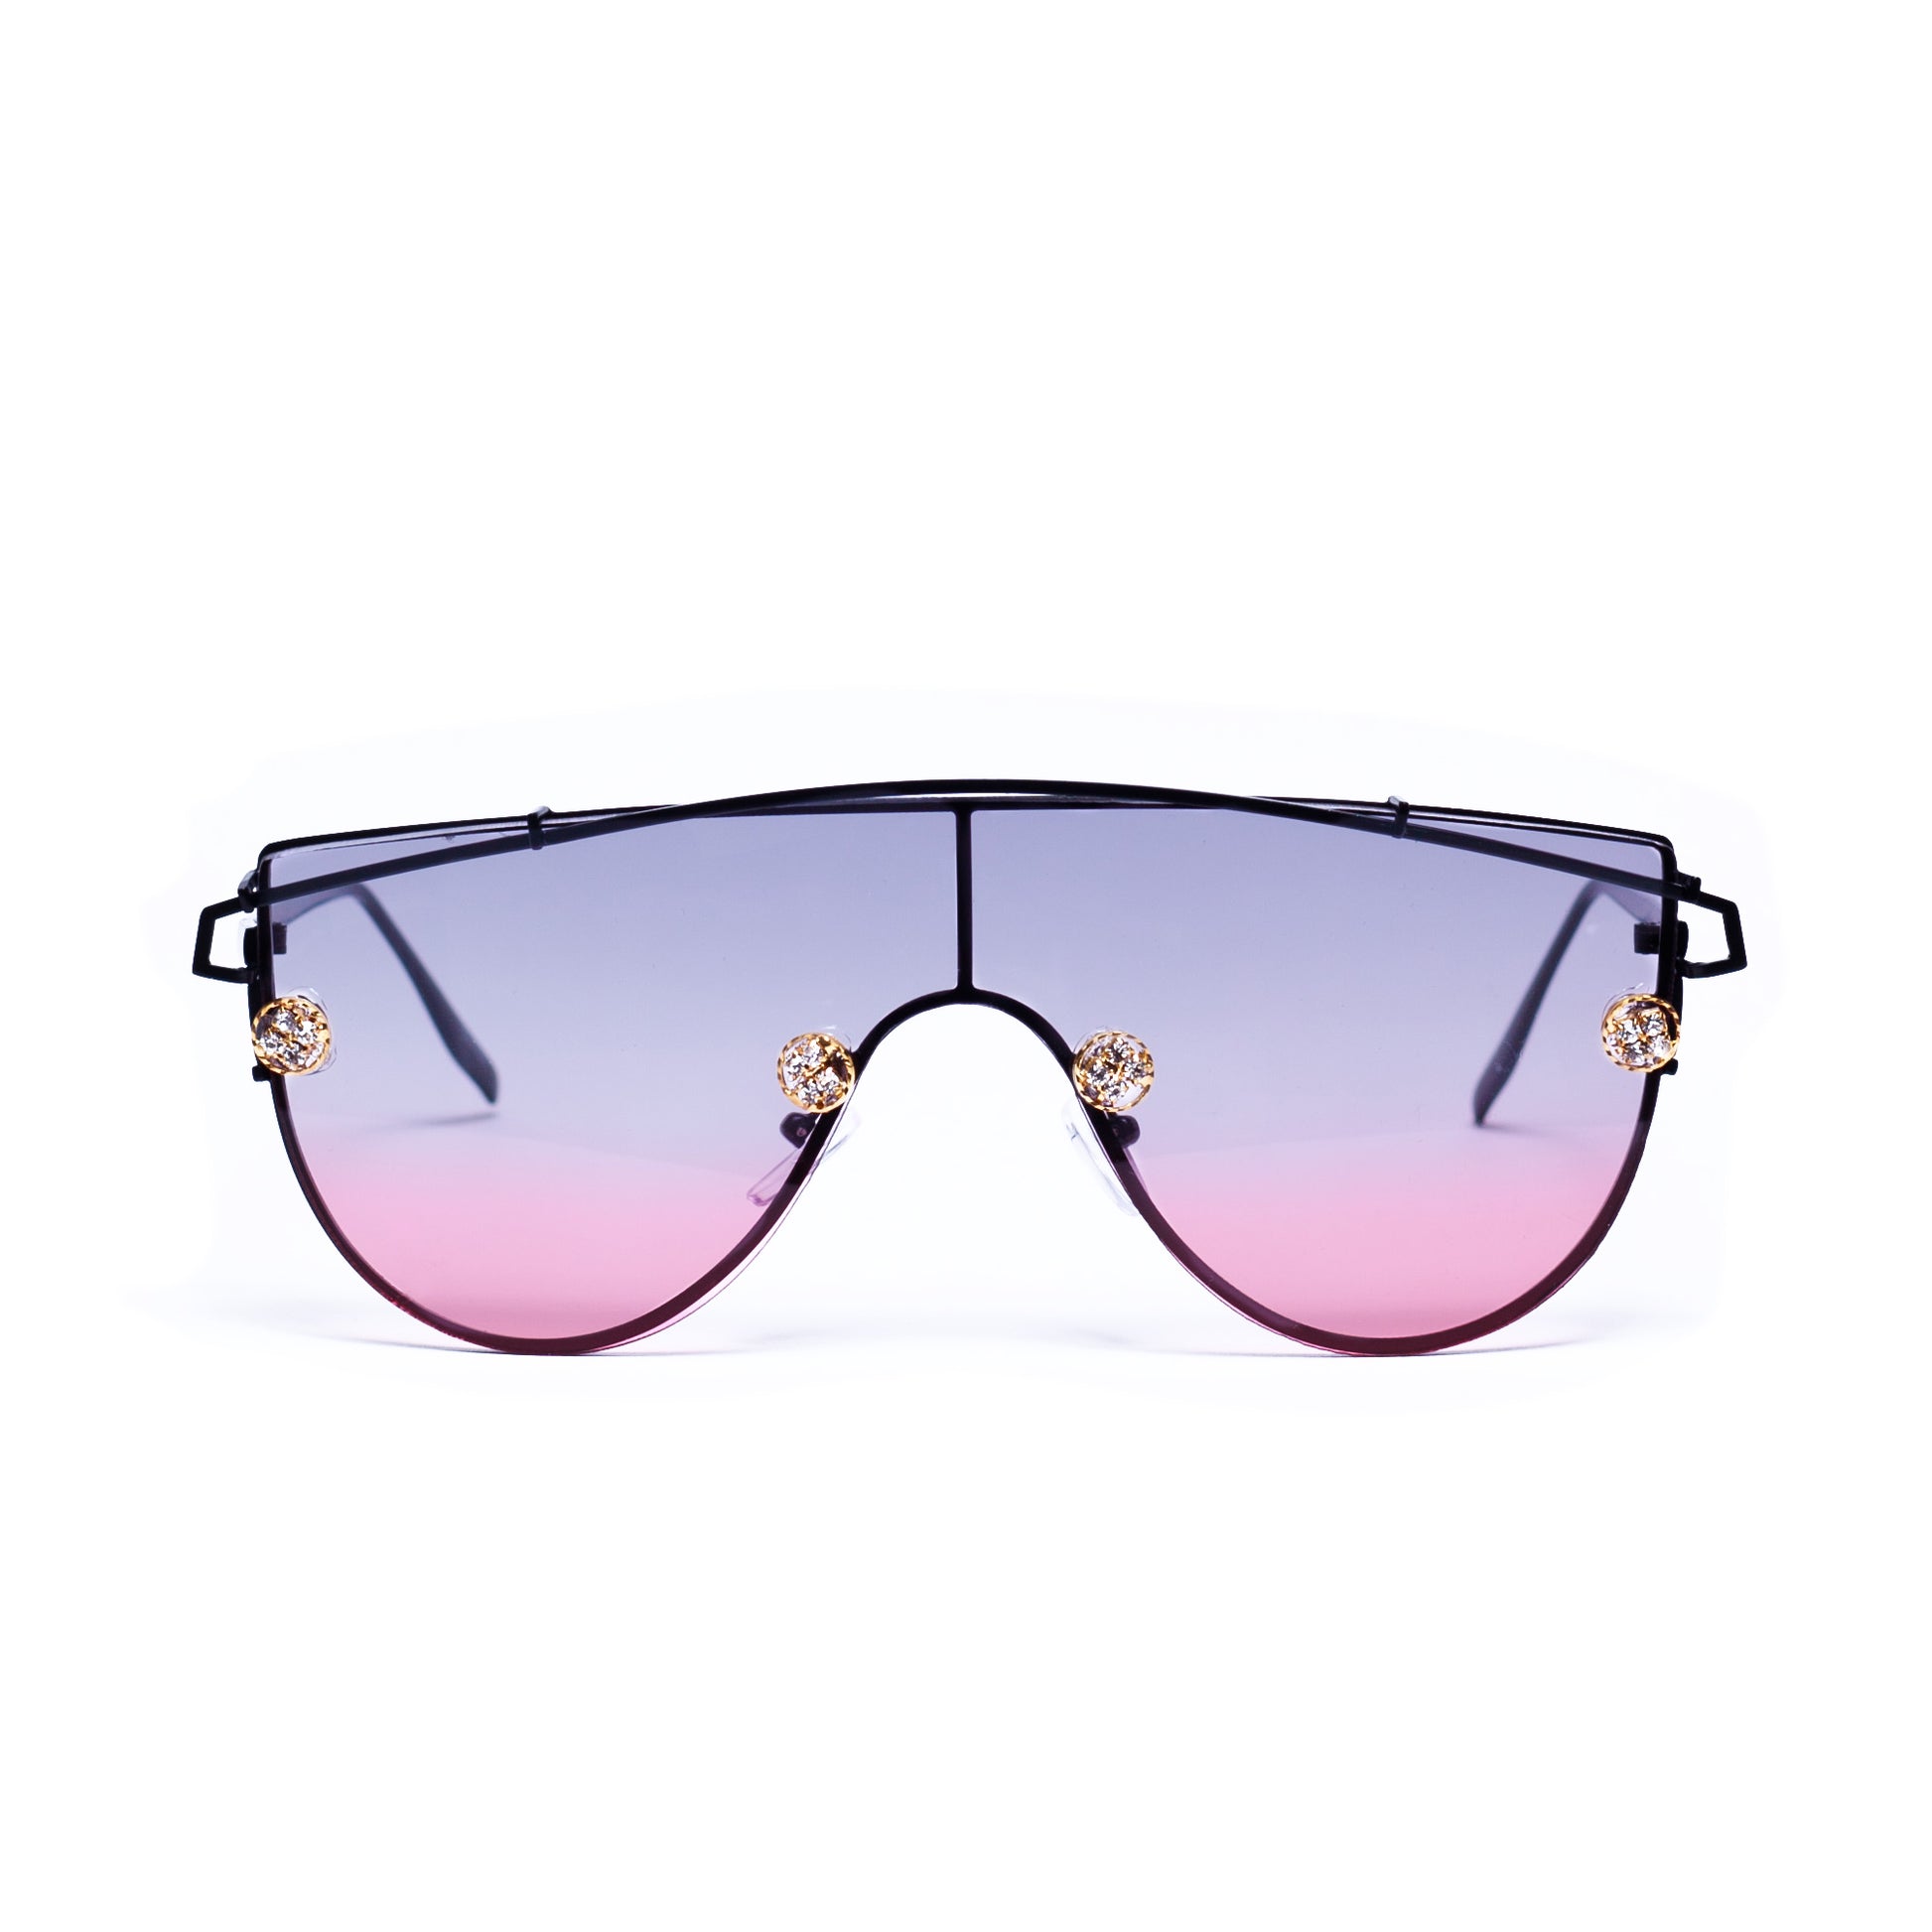 AT YOUR BEST IN CLEAR HOLOGRAM LENS Cherry Gradient Lens SUNNIES + OPTICS Sunglasses Collection, Tnemnroda man- NRODA